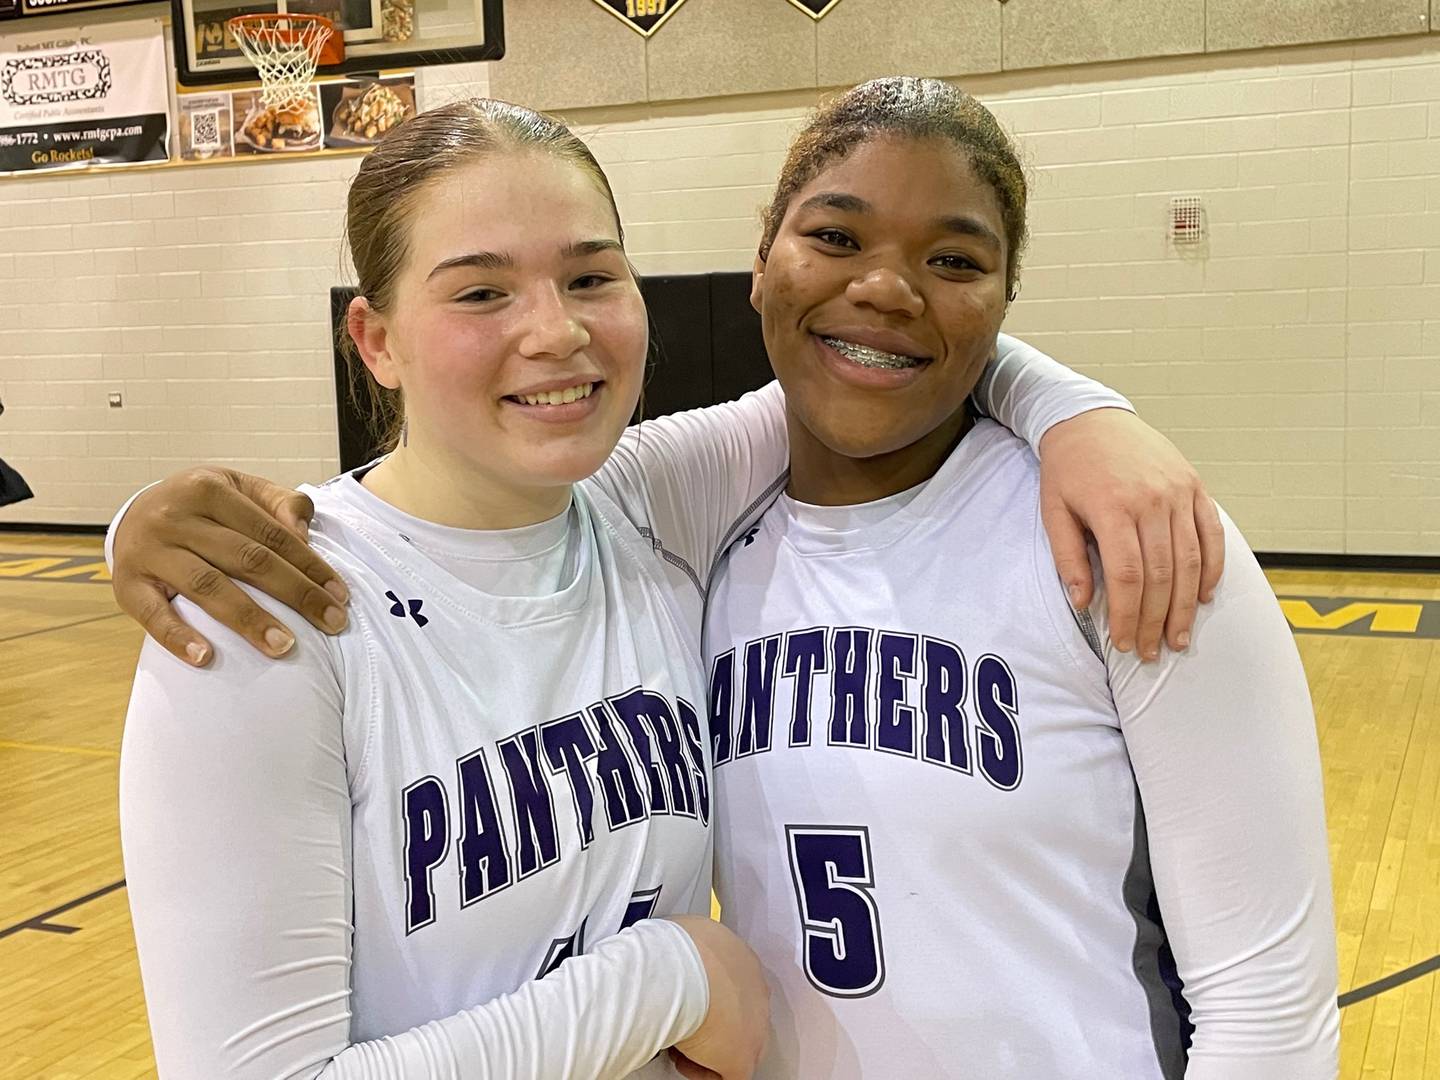 Jayda Mayles and Darielle Weems (5) combined for 23 points to lead No. 11 Pikesville past Patterson Mill, 44-31, in the Class 1A state girls basketball semifinals Tuesday night. The Panthers will go for their third straight state championship Saturday at Xfinity Center at the University of Maryland against Mountain Ridge, a first-time finalist from Allegany County.